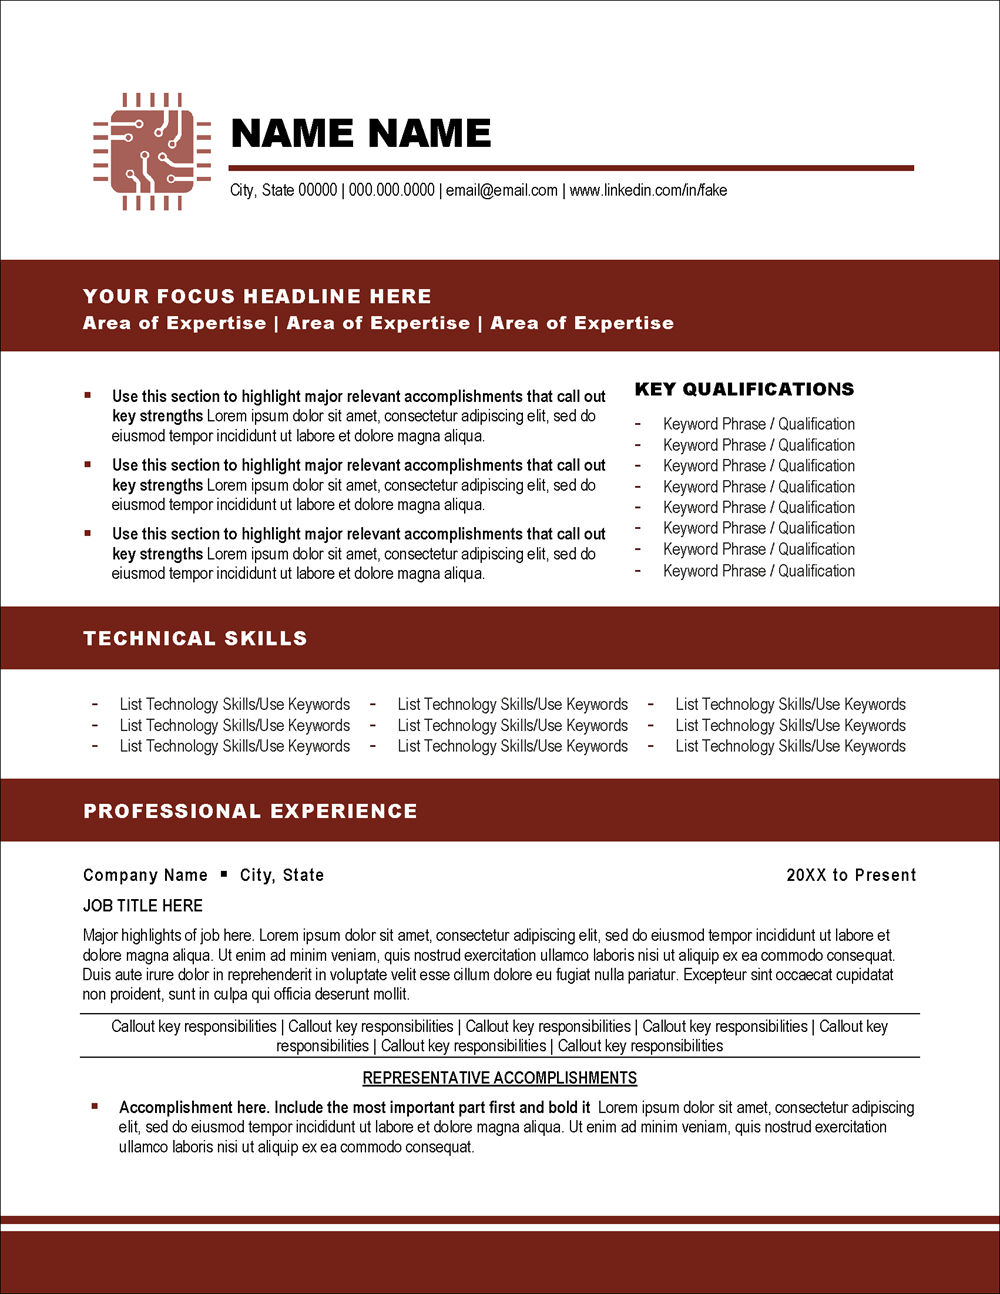 Technical Pursuits IT Resume TemplatePage 1